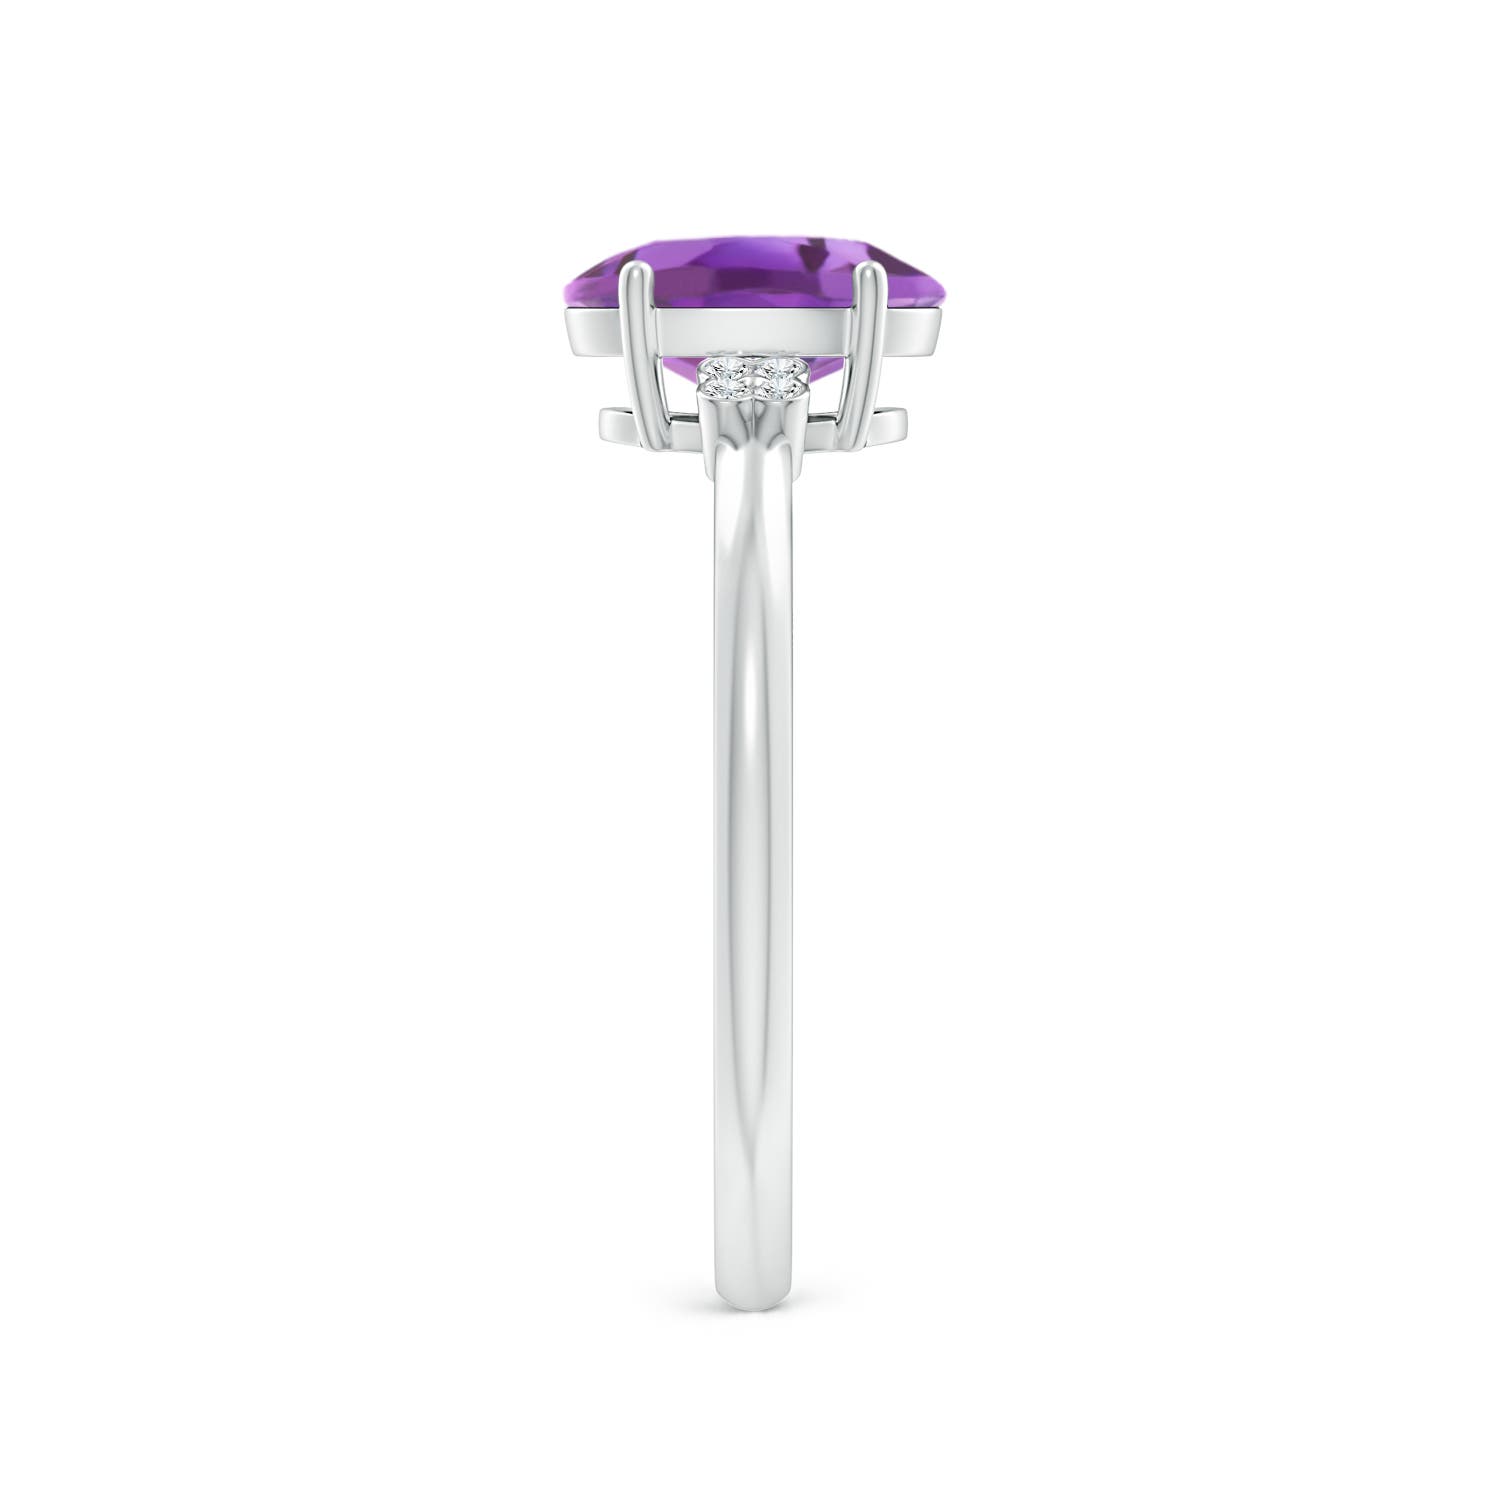 A- Amethyst / 1.2 CT / 14 KT White Gold